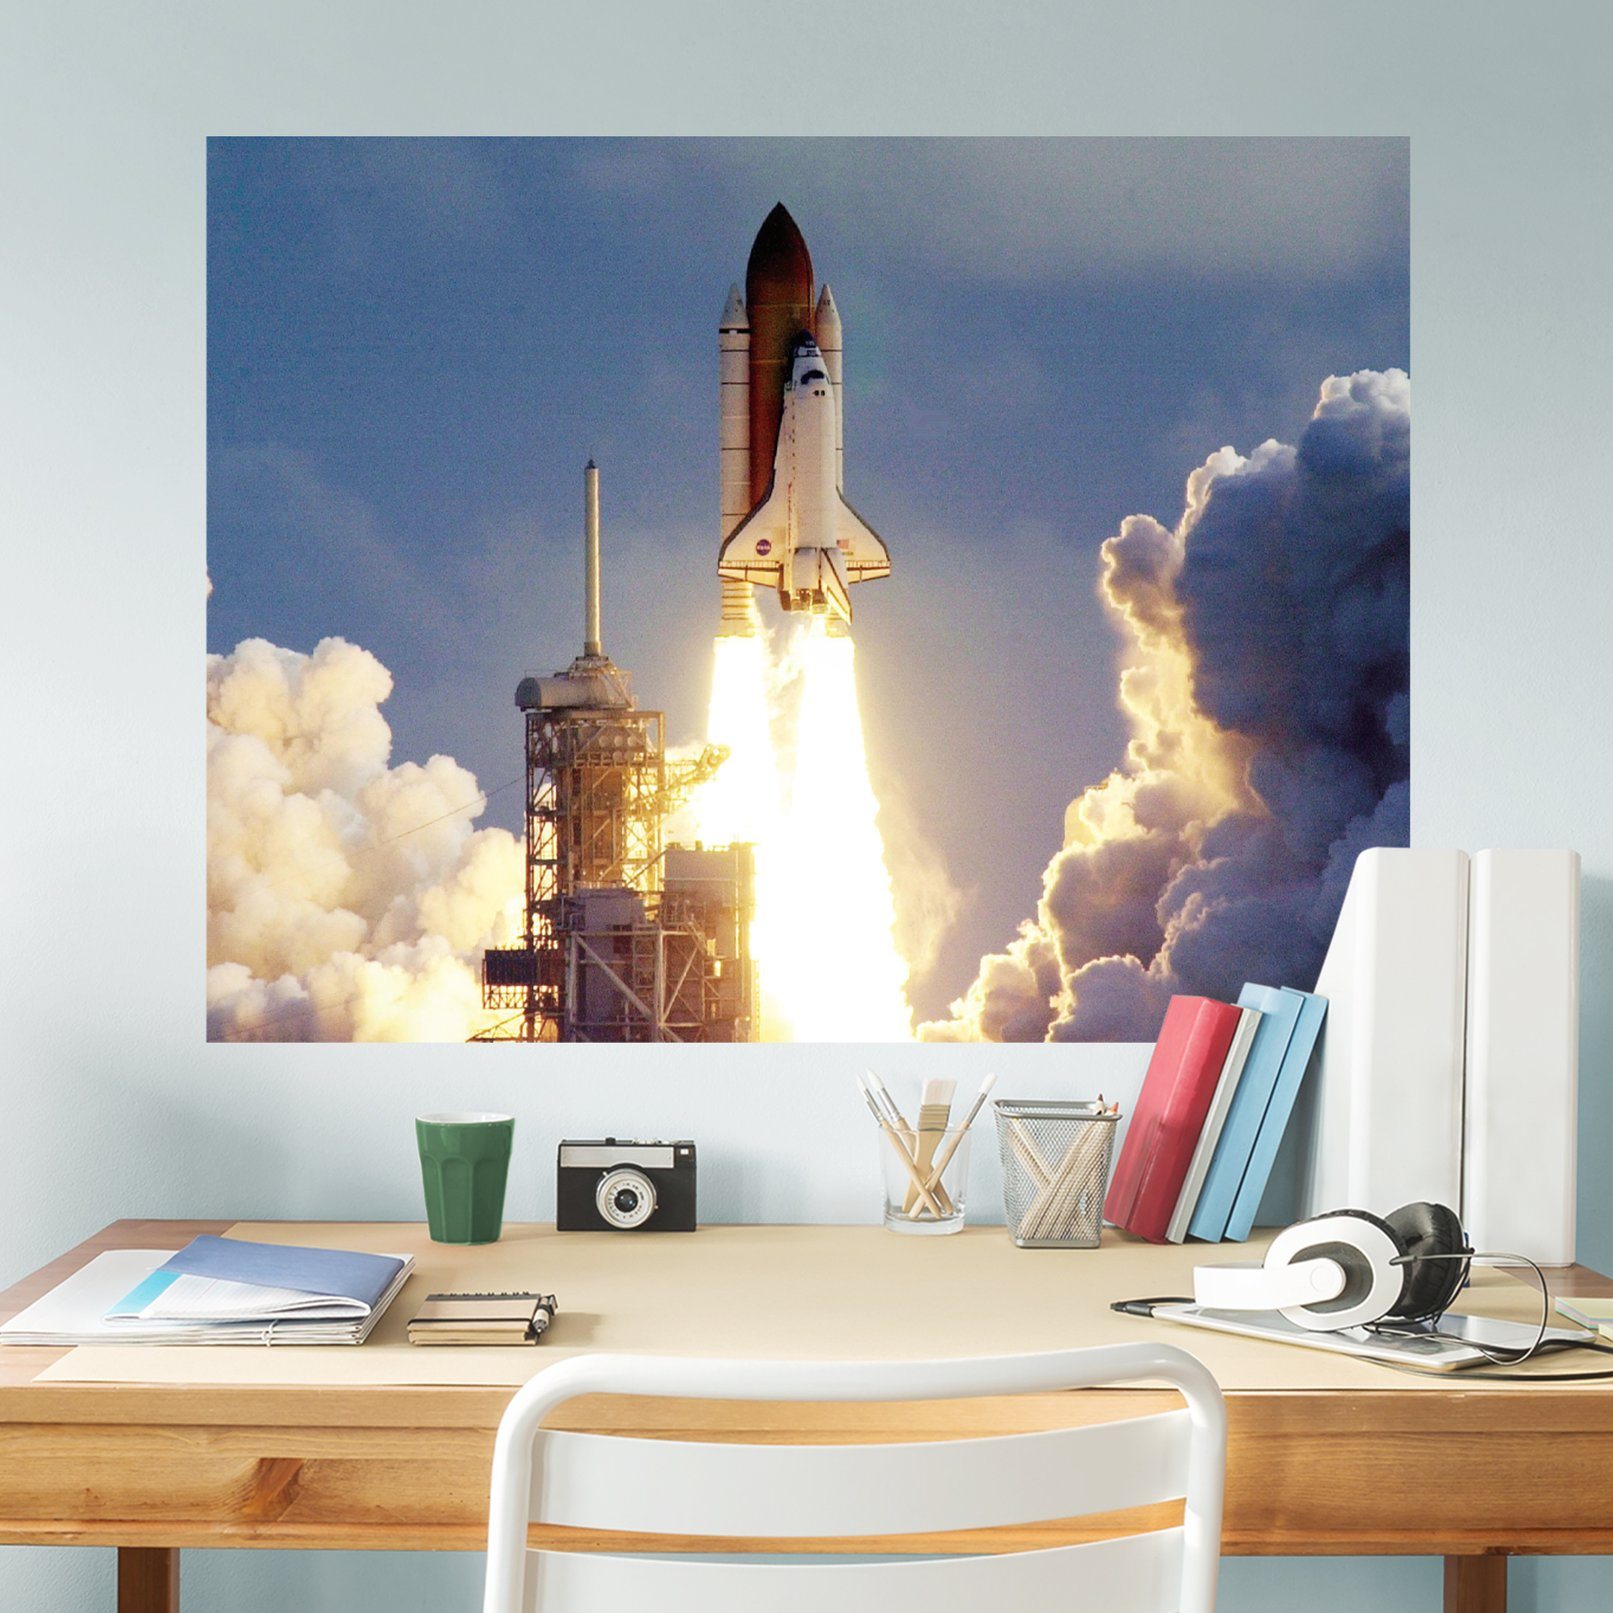 https://fathead.com/collections/space-exploration/products/m1019-00033?variant=33142112157784